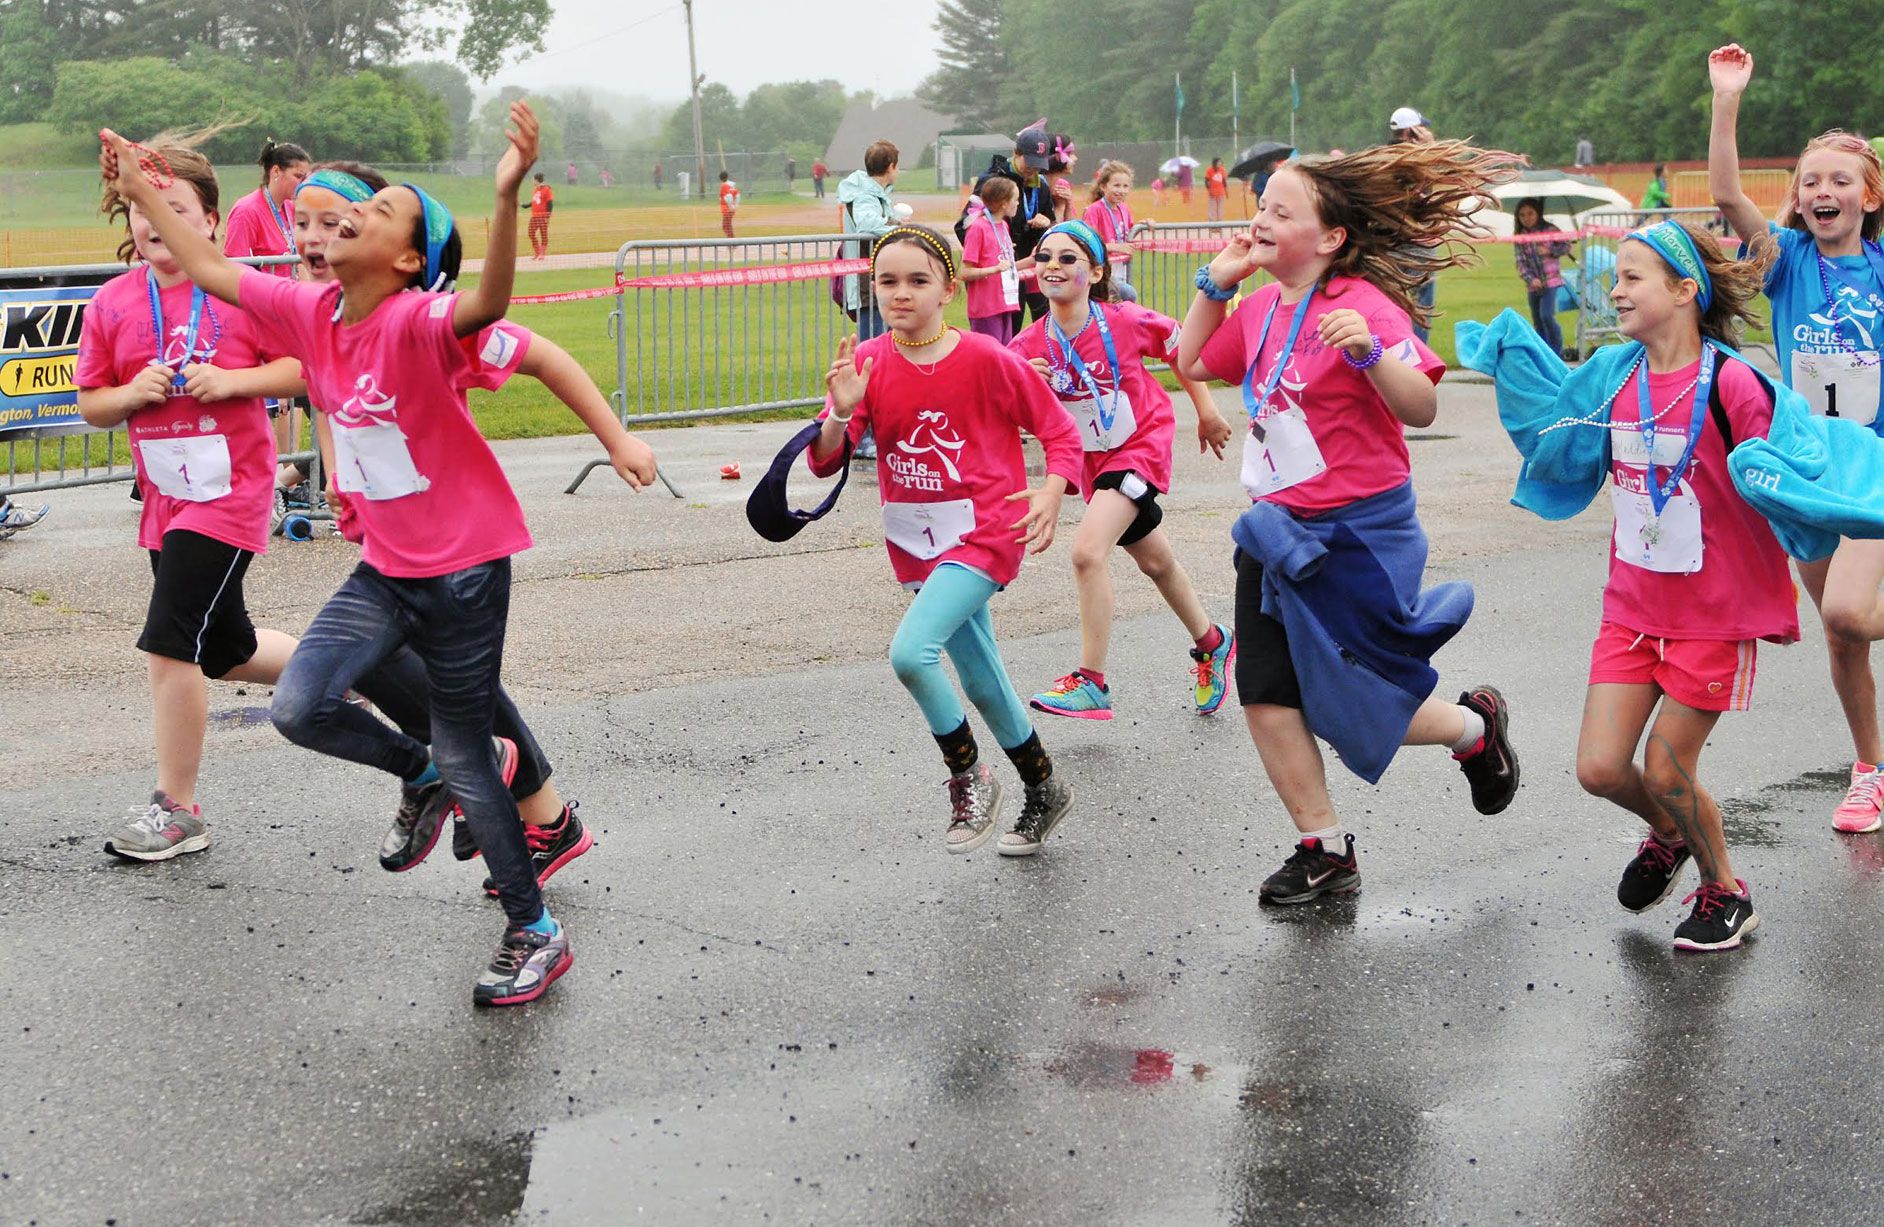 Running Helps Young Girls Cope With Pre-Teen Stress | Runner's World